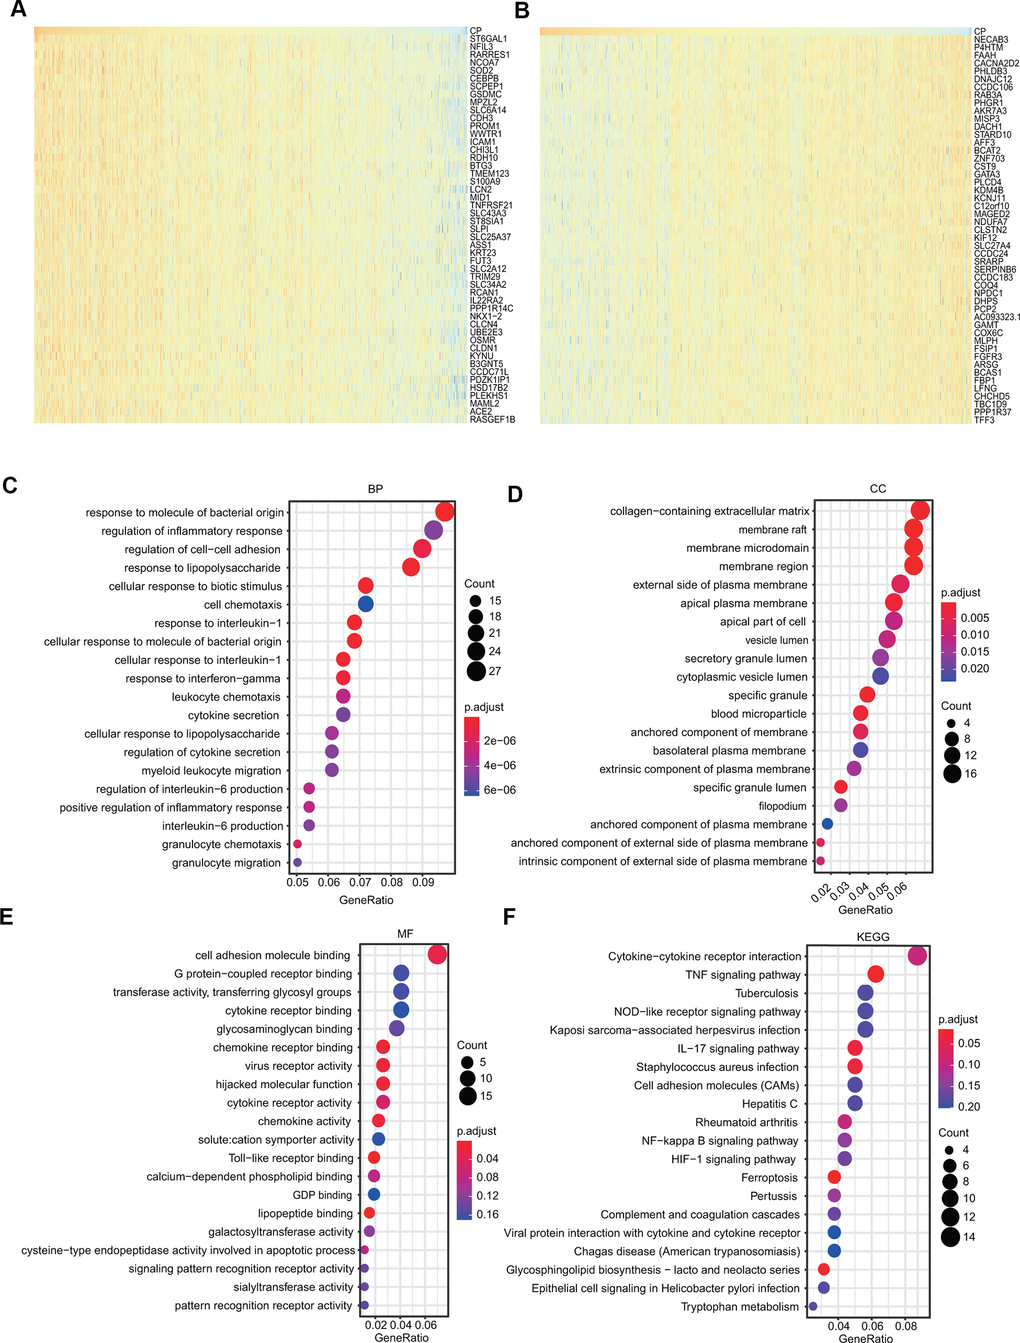 GO and KEGG analyses of ceruloplasmin in the TCGA-BRCA cohort. (A, B) Heat maps demonstrating the top 50 genes positively or negatively linked with ceruloplasmin in TCGA-BRCA. (C–E) Twenty significantly enriched GO annotations (BP, MF and CC) of ceruloplasmin in the TCGA-BRCA cohort. (F) Significantly enriched 20 KEGG pathways of ceruloplasmin in the TCGA-BRCA cohort.